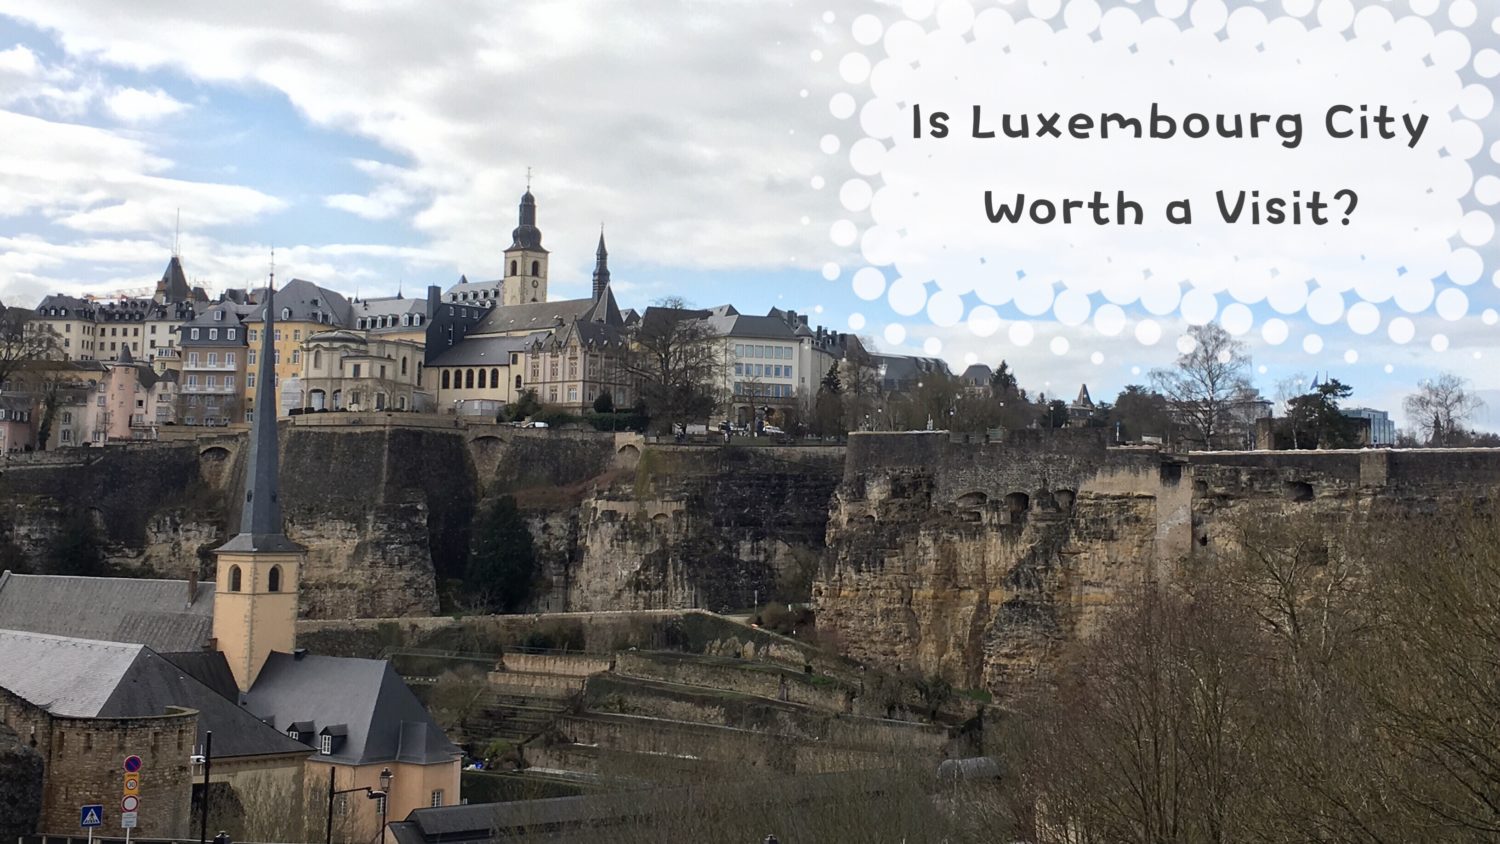 Is Luxembourg City worth a visit?